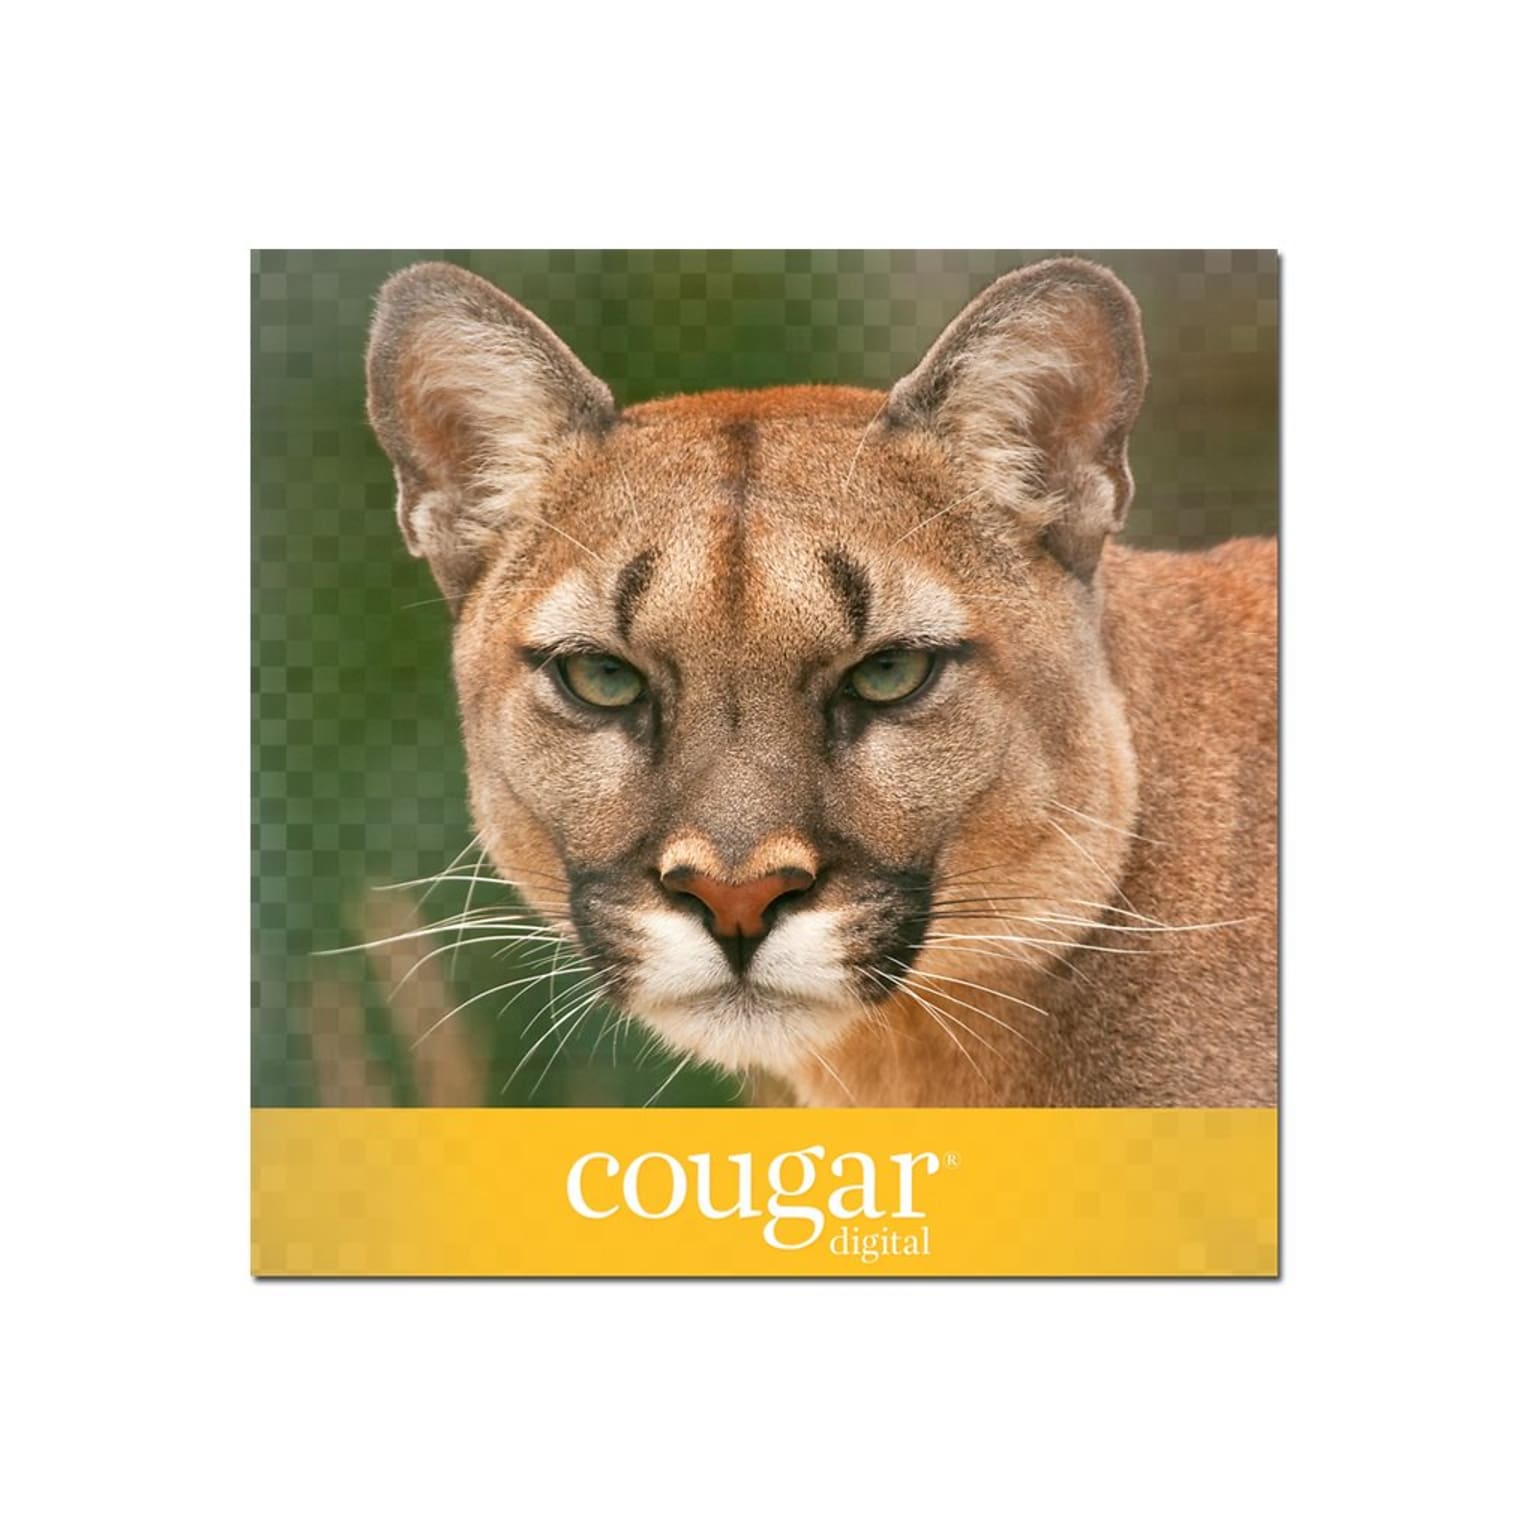 Domtar Cougar Digital 10% Recycled 8.5 x 11 Business Paper, 70 lbs., 98 Brightness, 500 Sheets/Ream, 8 Reams/Carton (2826CASE)